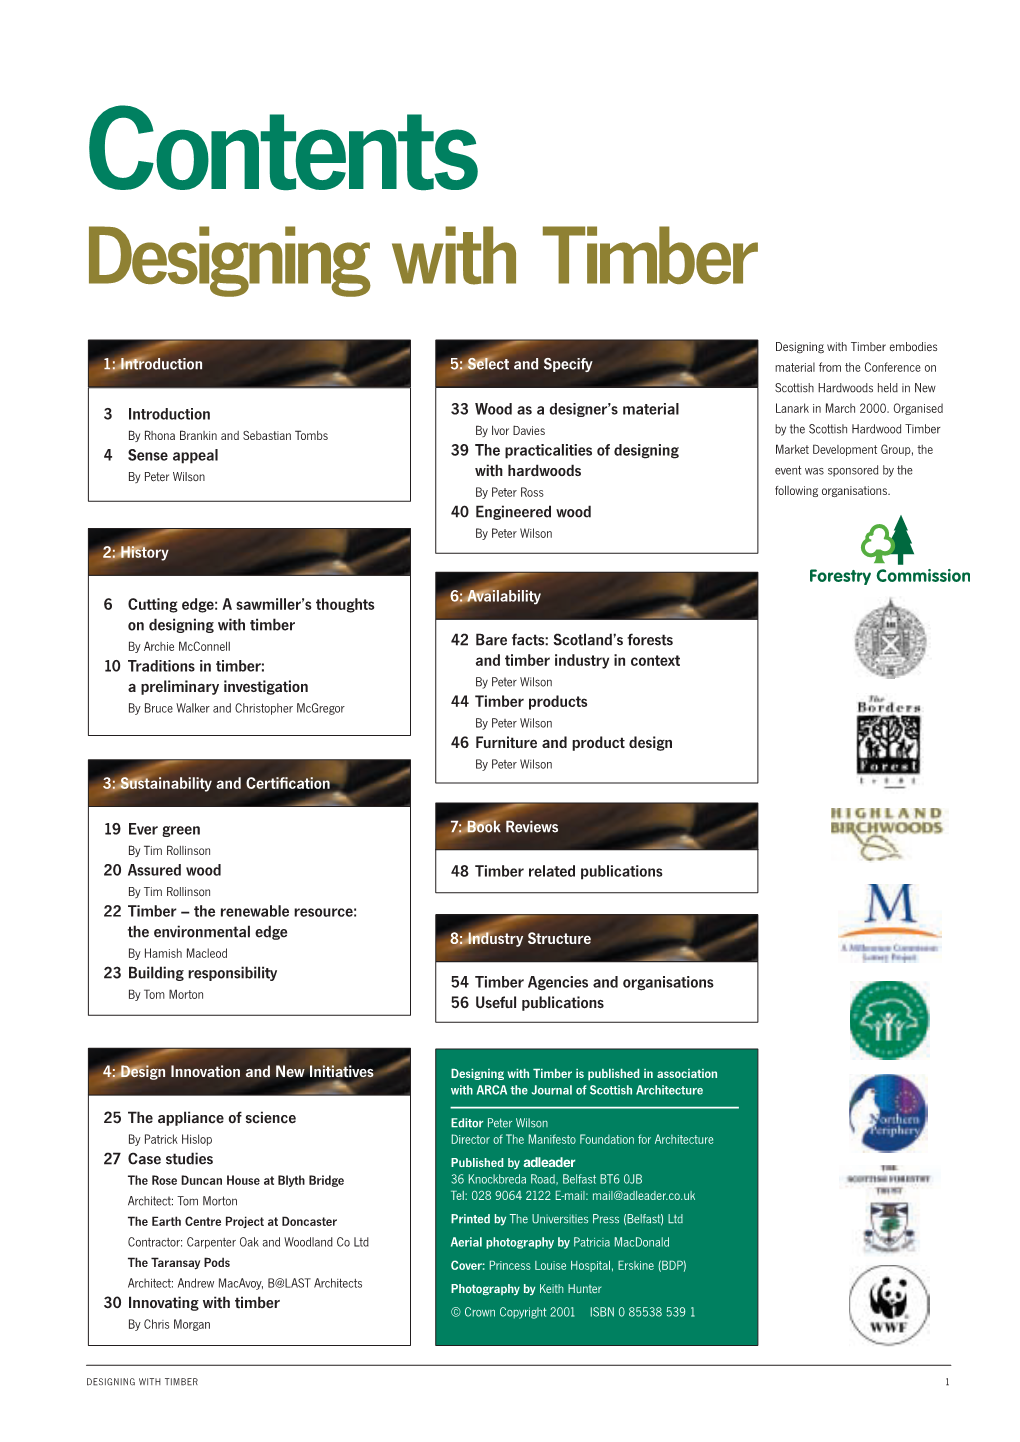 Designing with Timber